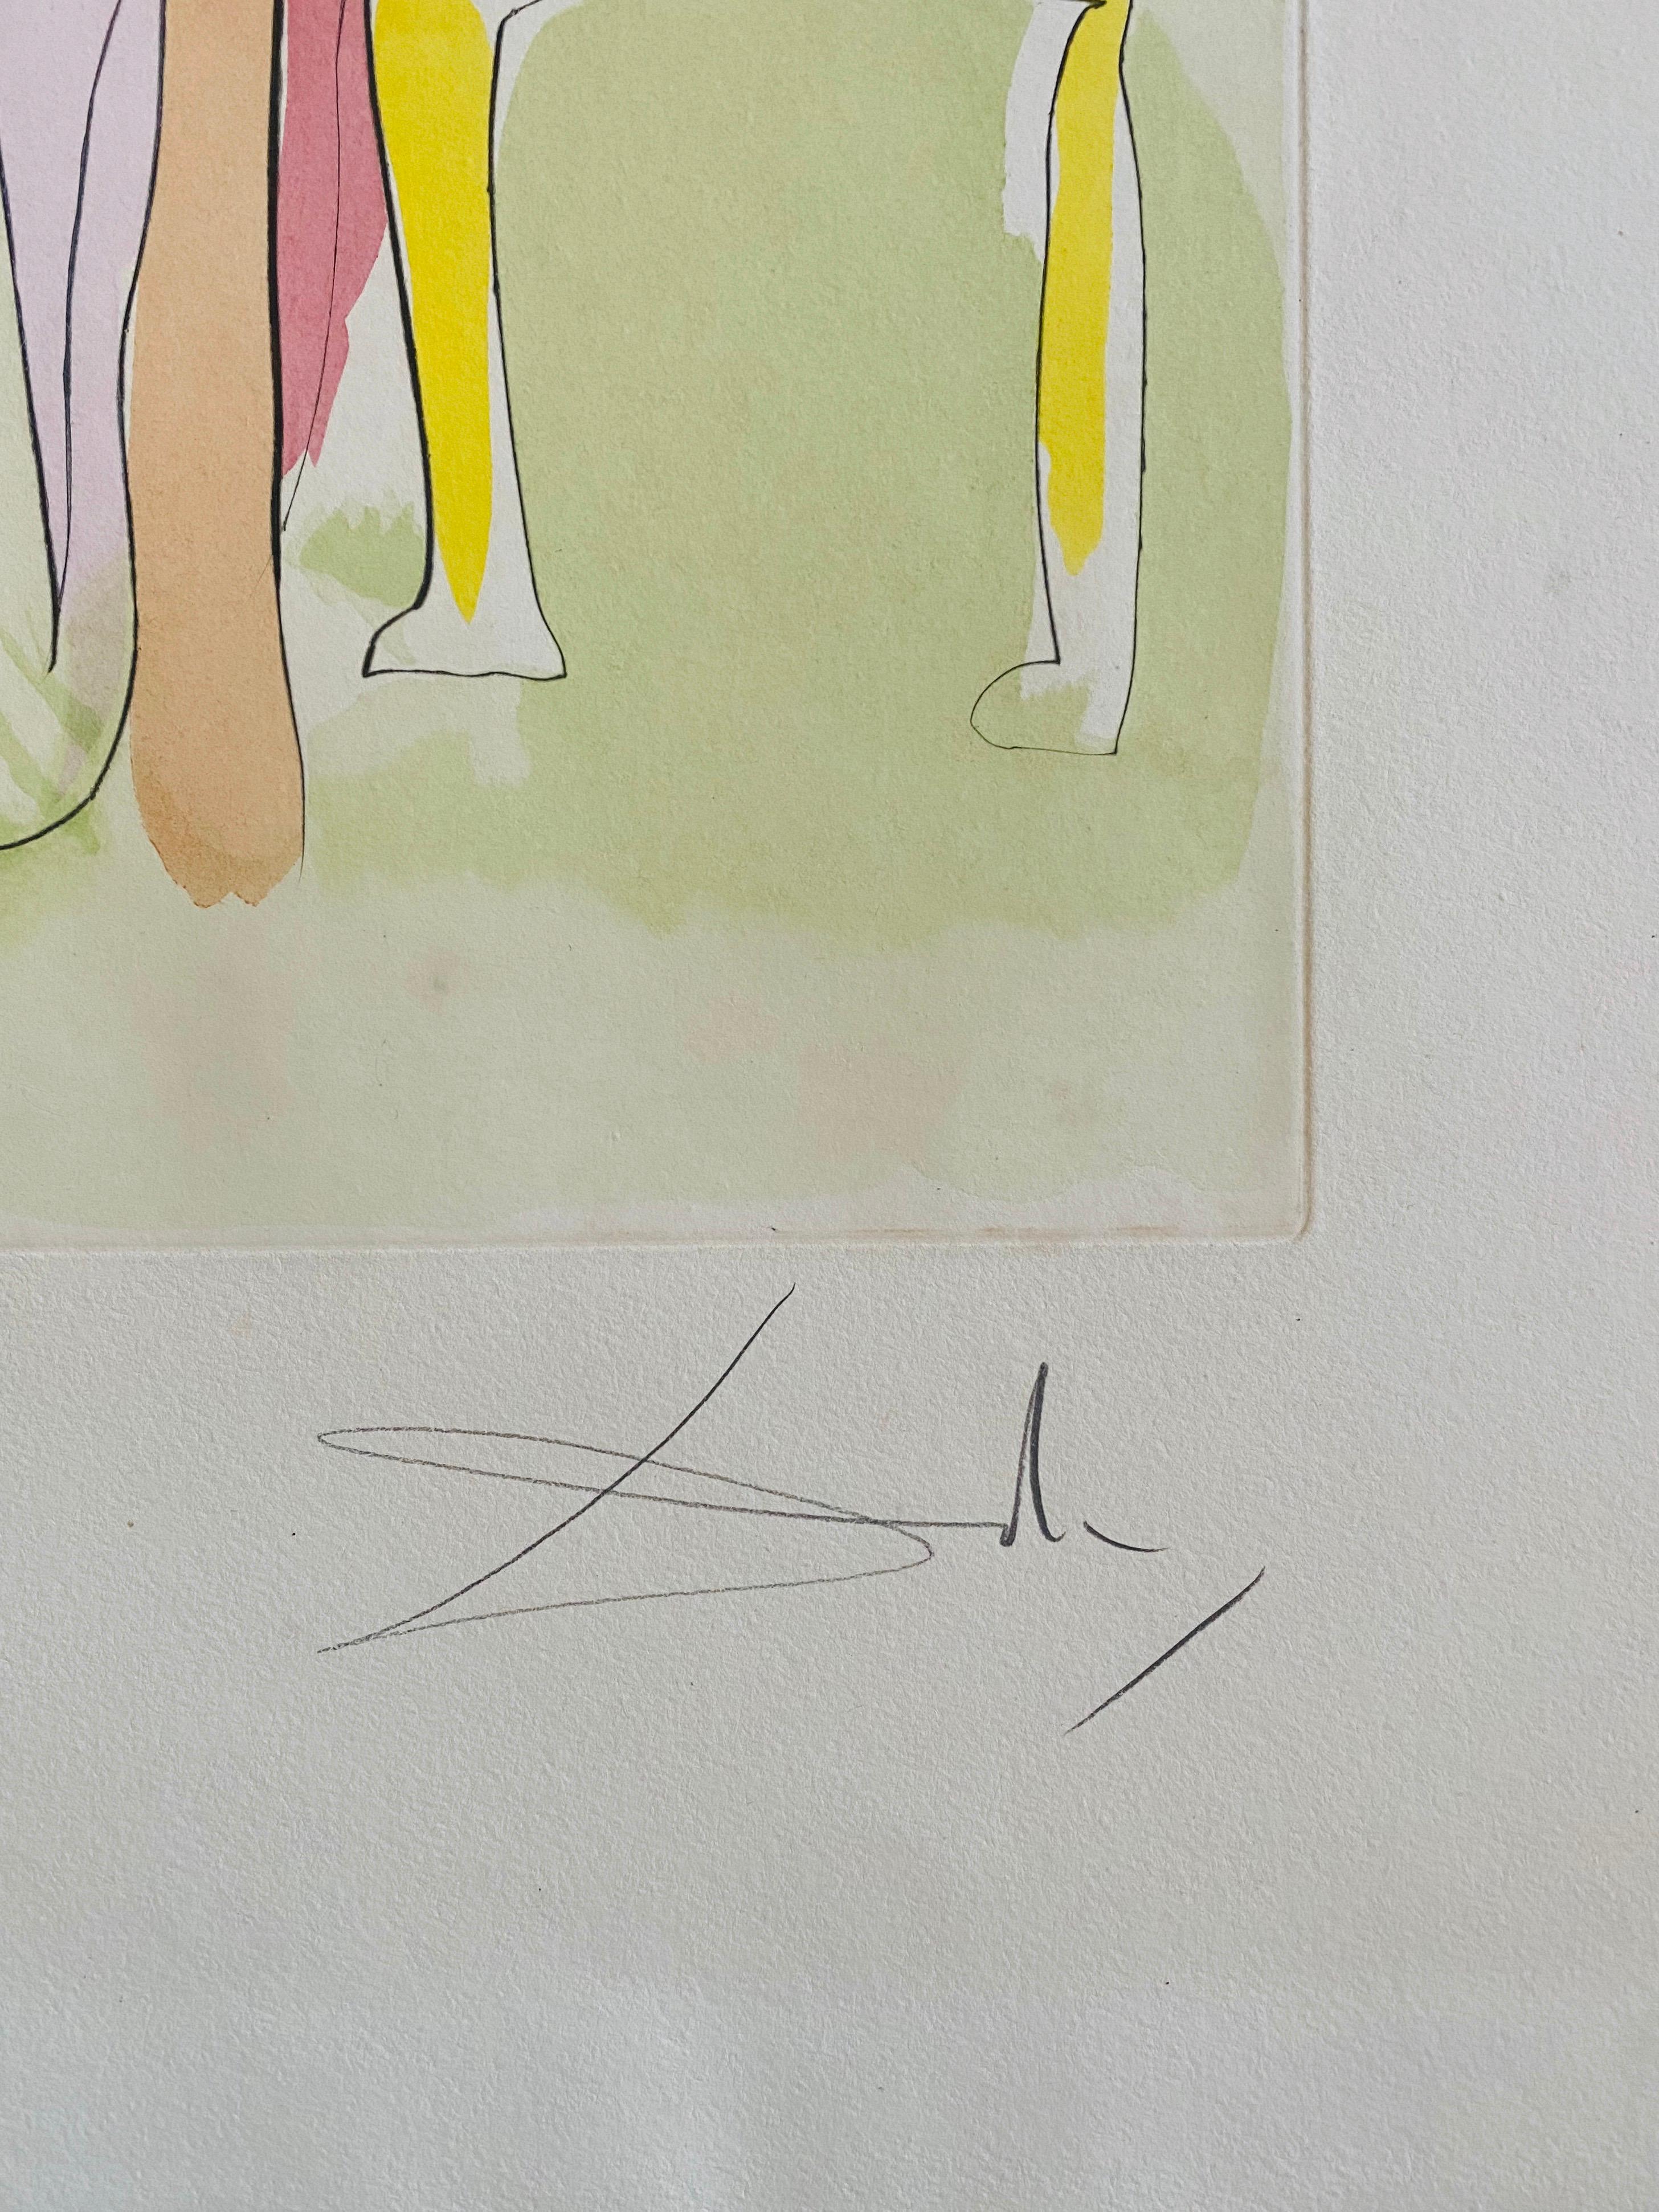  An original signed drypoint etching with color pochoir by Spanish artist Salvador Dali titled 